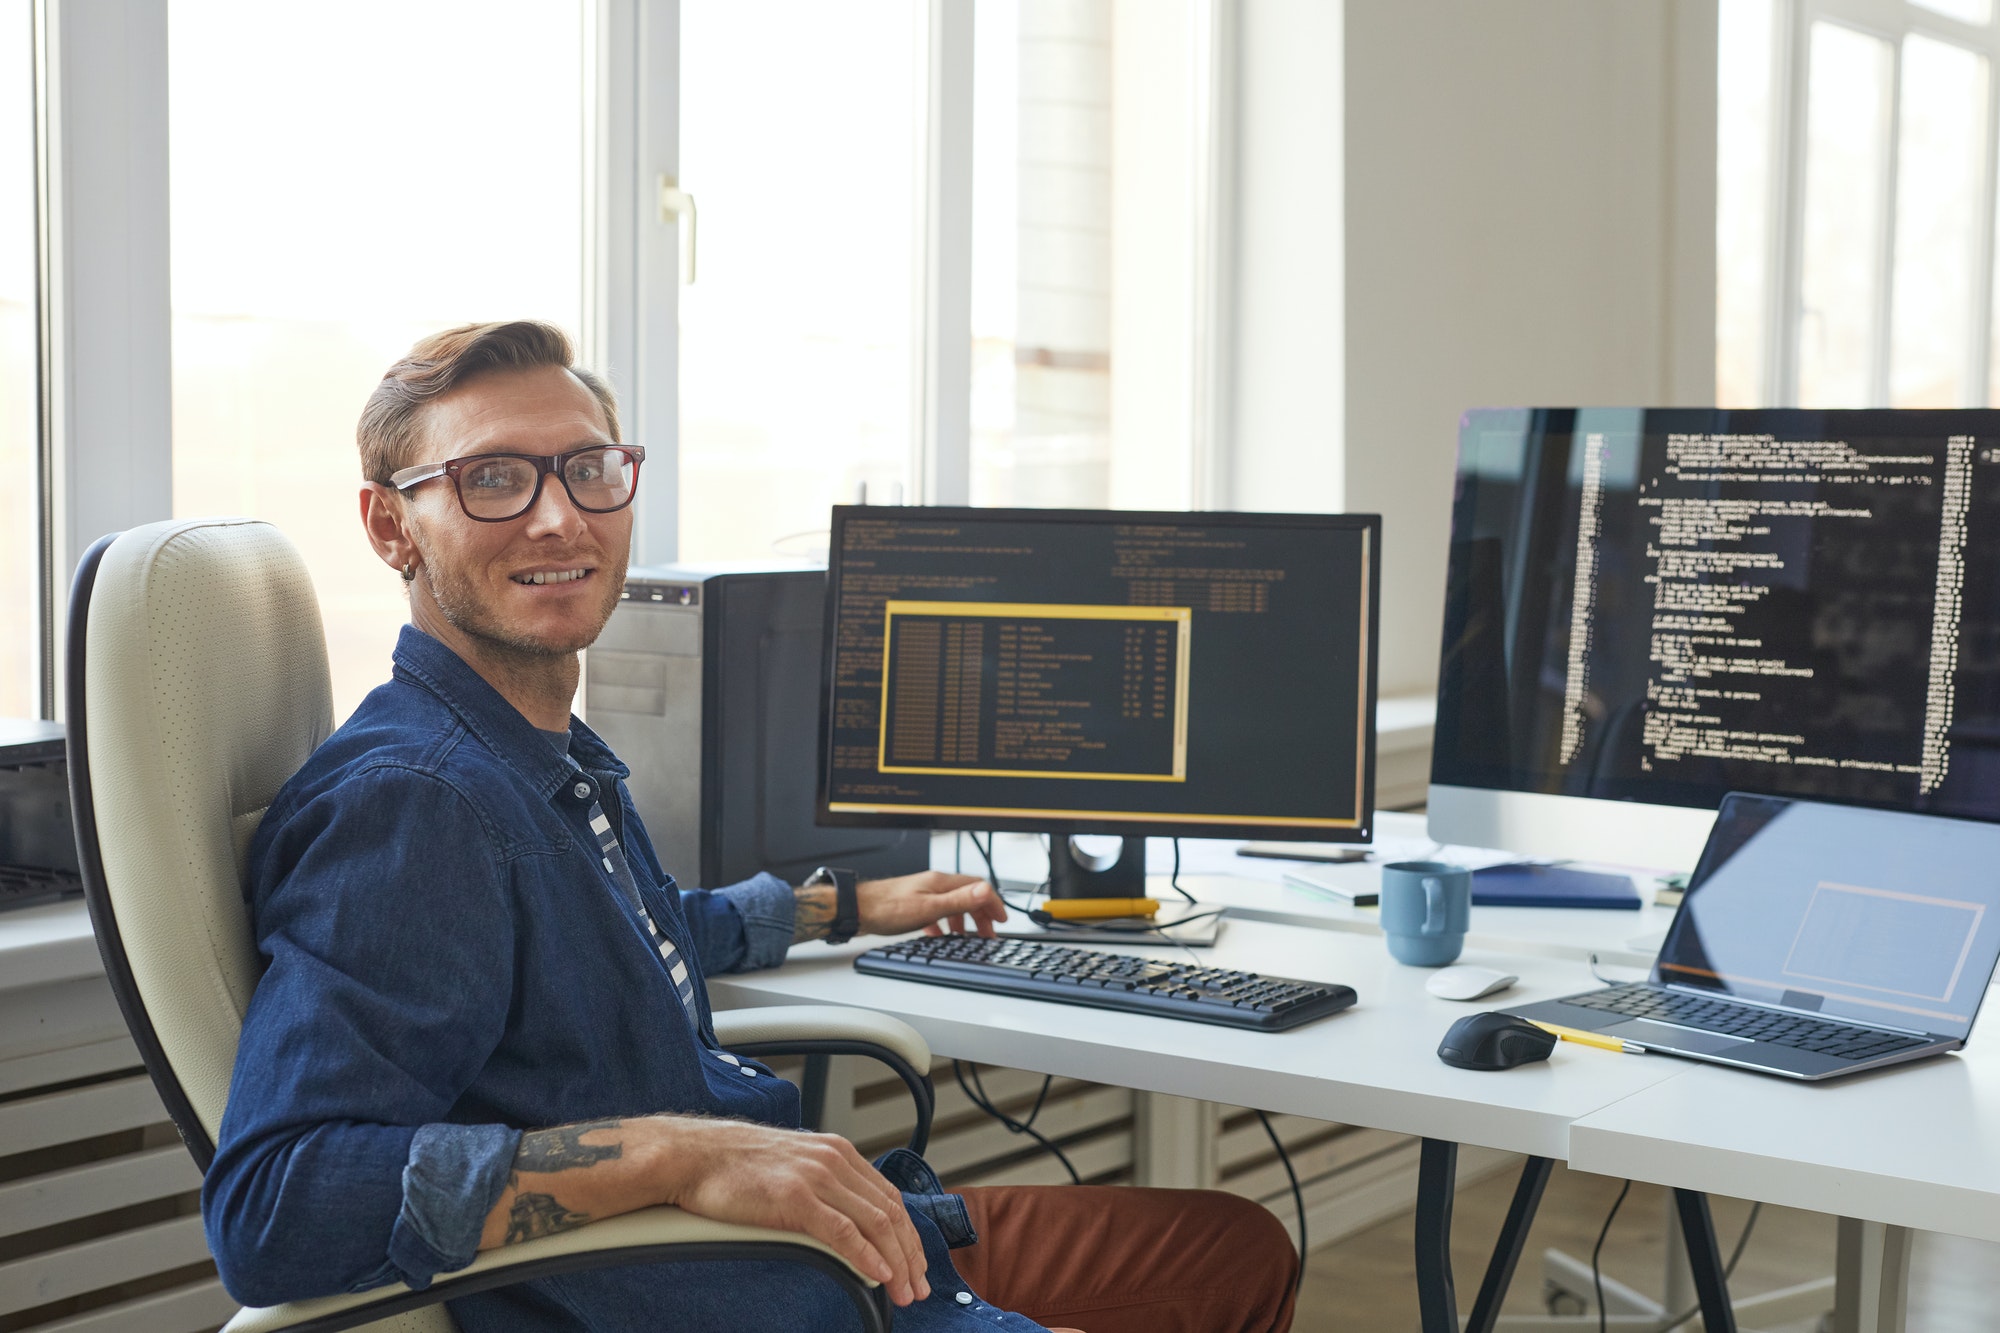 Portrait of IT Programmer Using Computers with Code on Screen